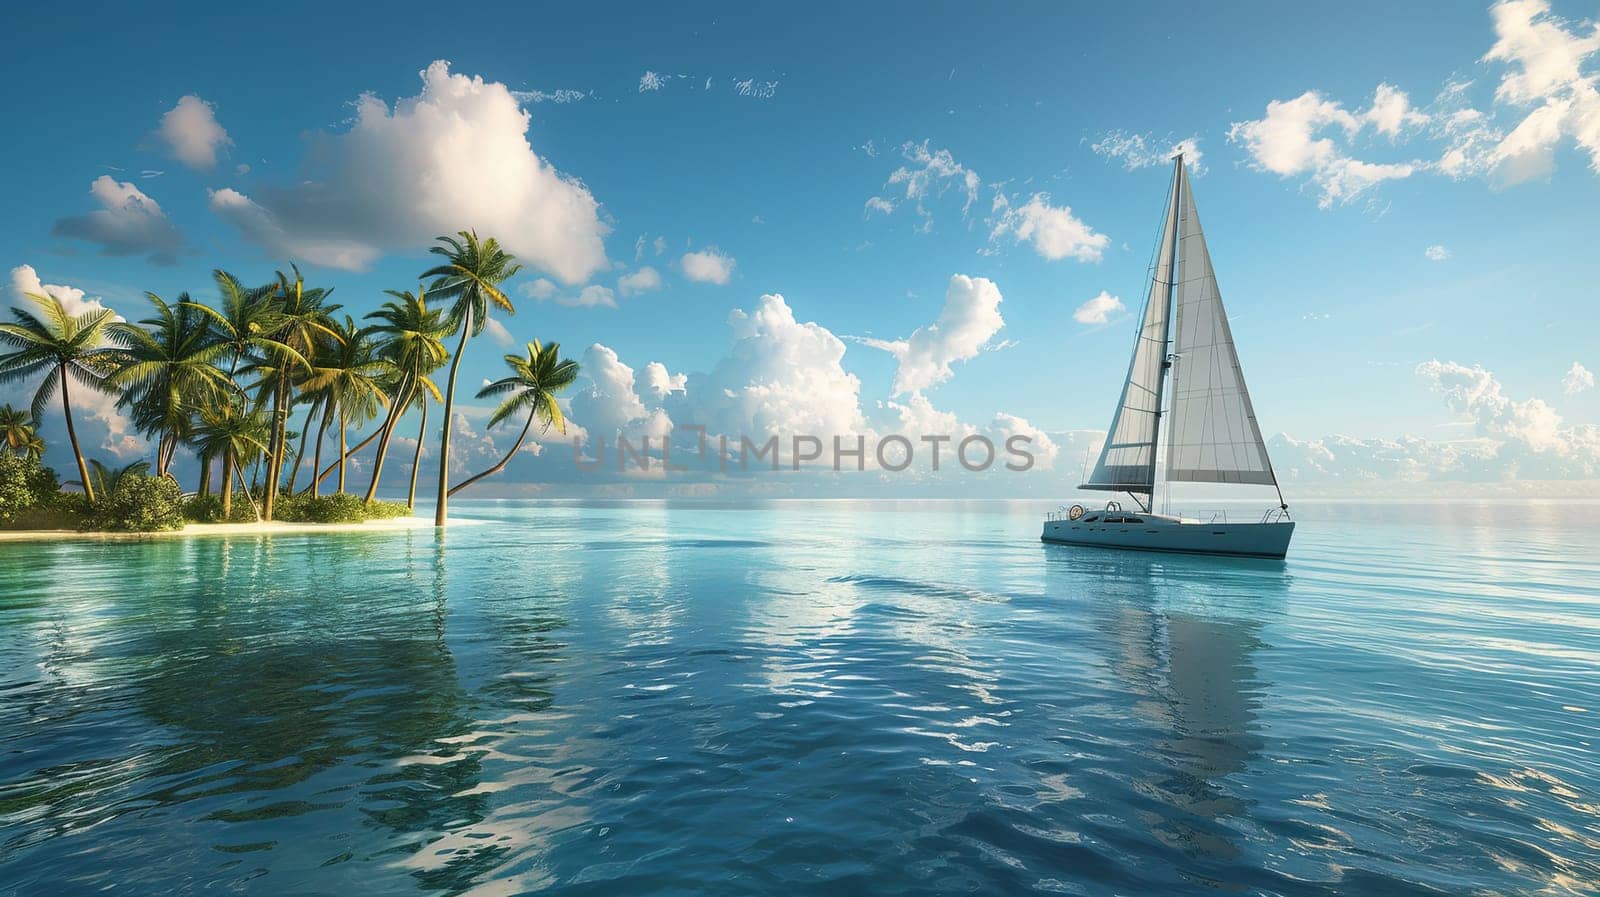 A serene scene of a sailboat gracefully gliding through the ocean with lush palm trees in the background.